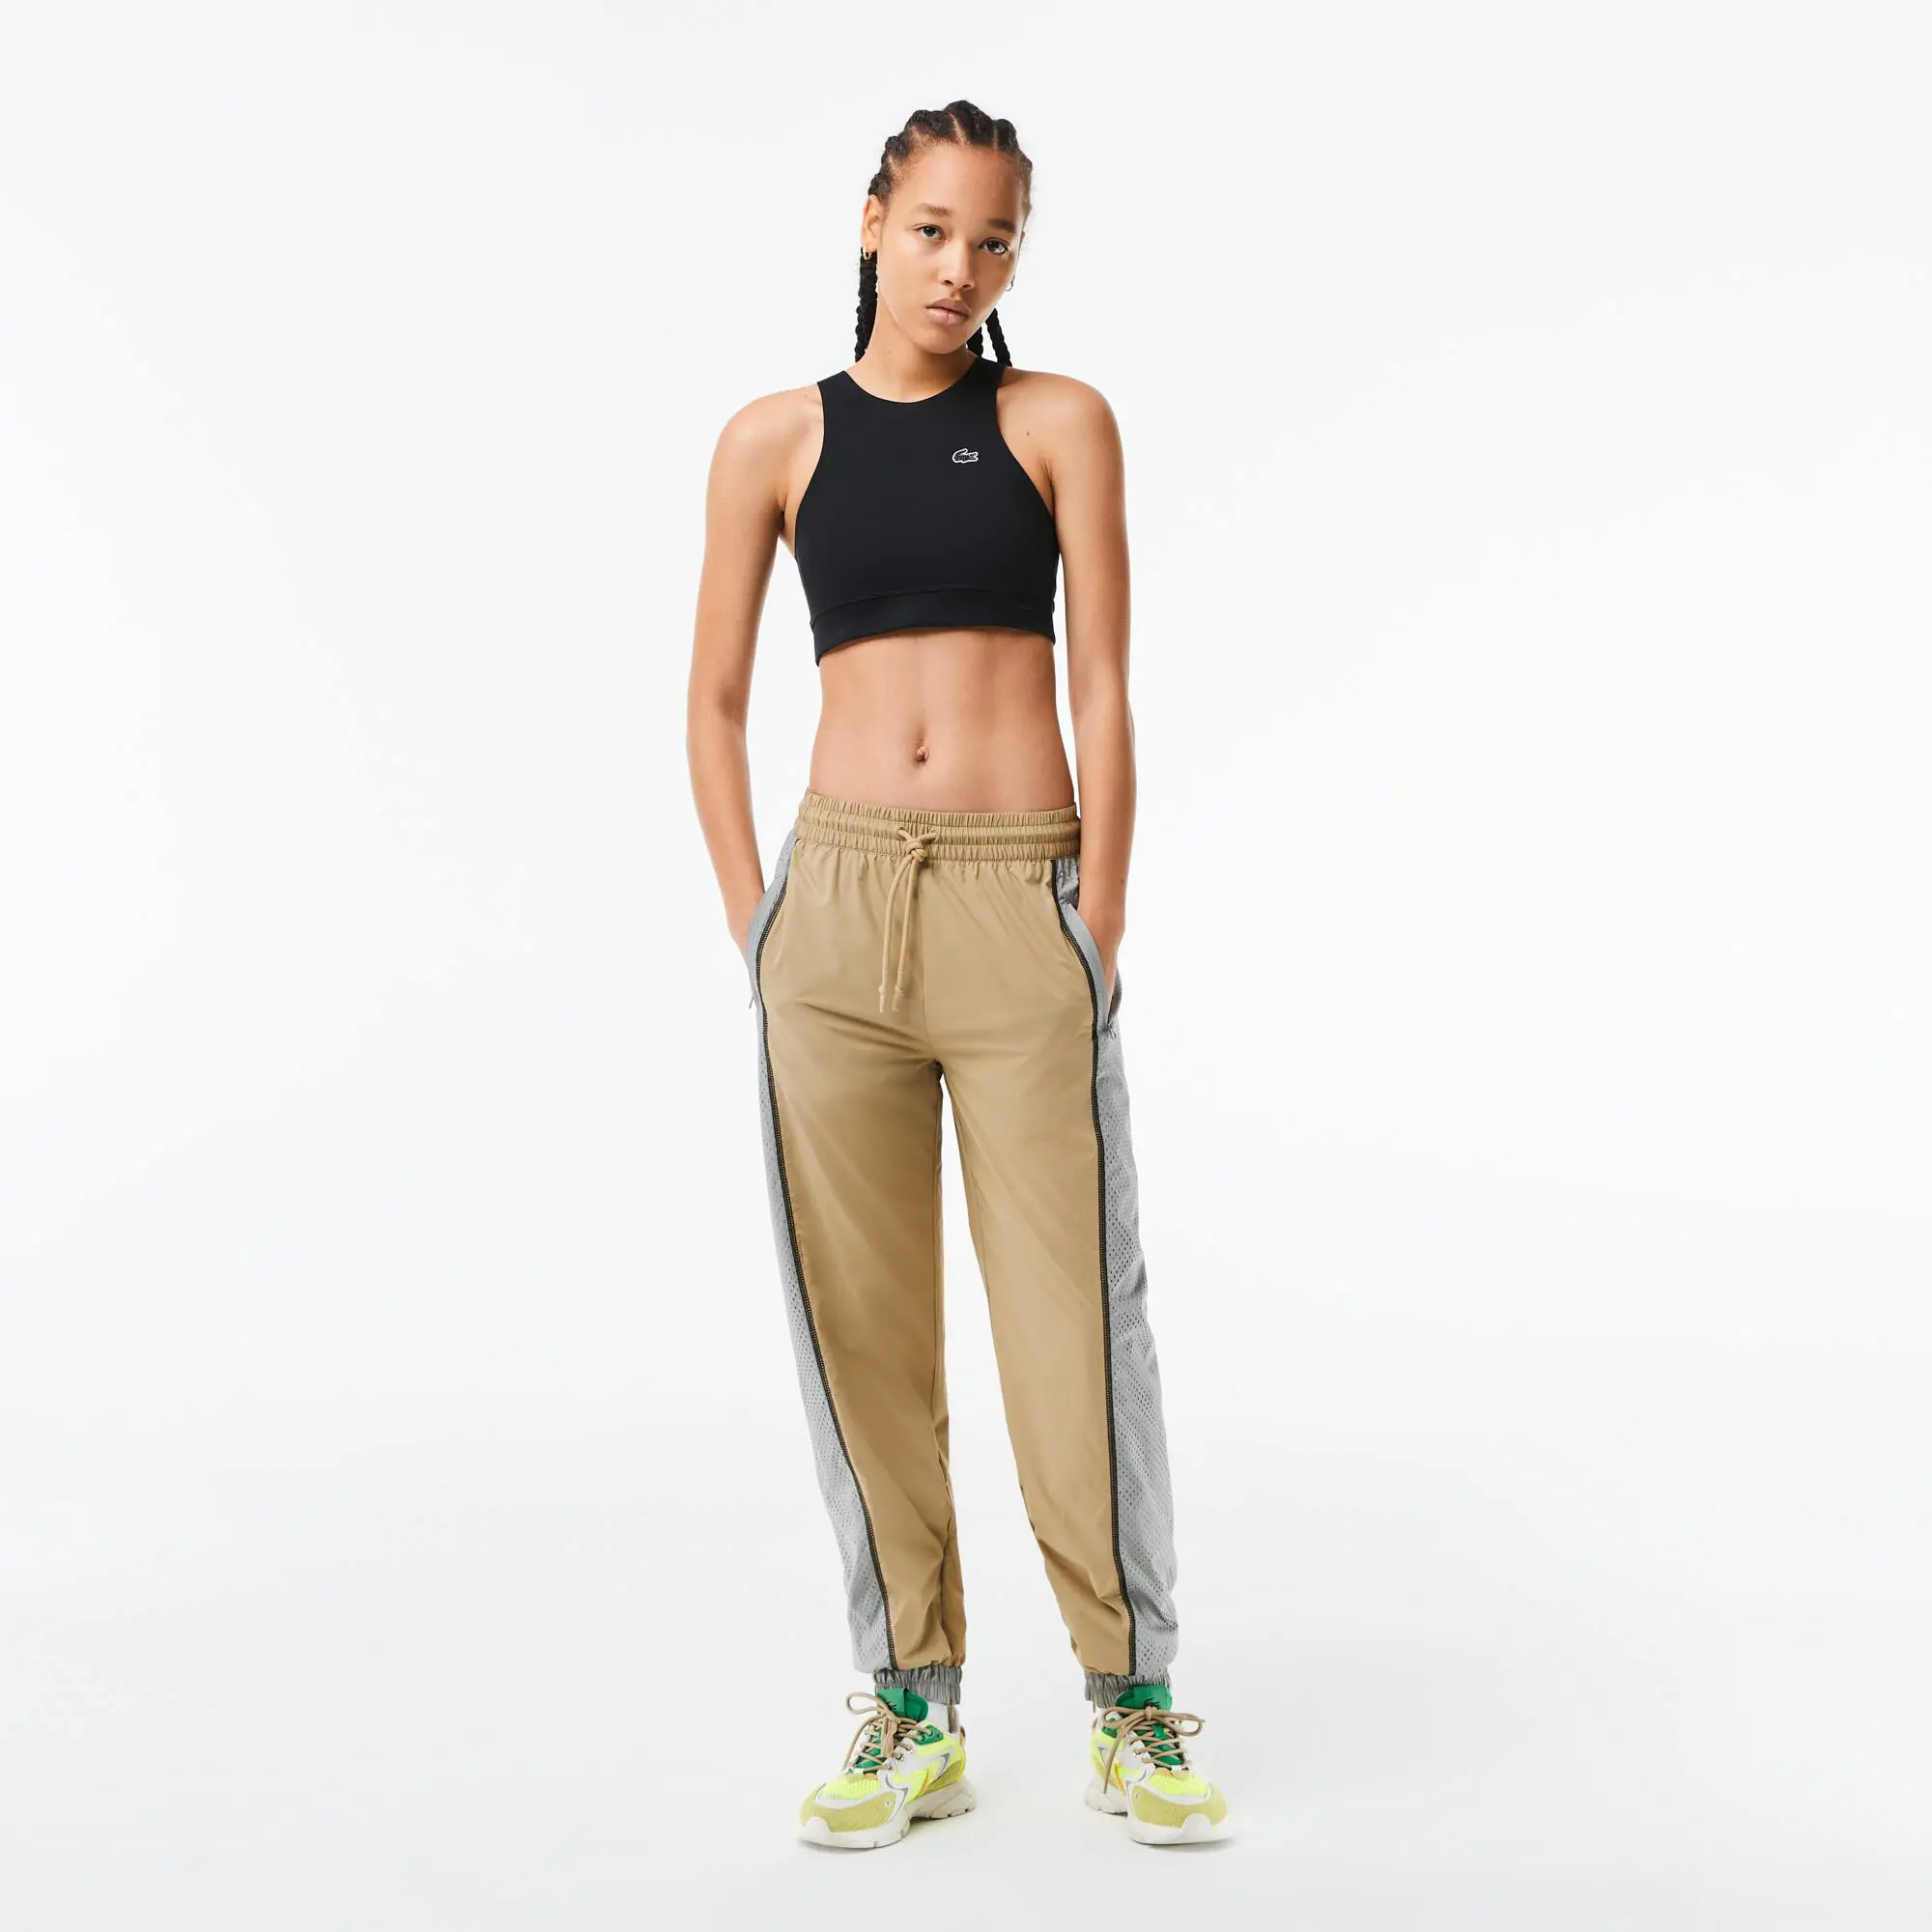 Lacoste Women’s Lacoste Perforated Effect Track Pants. 1